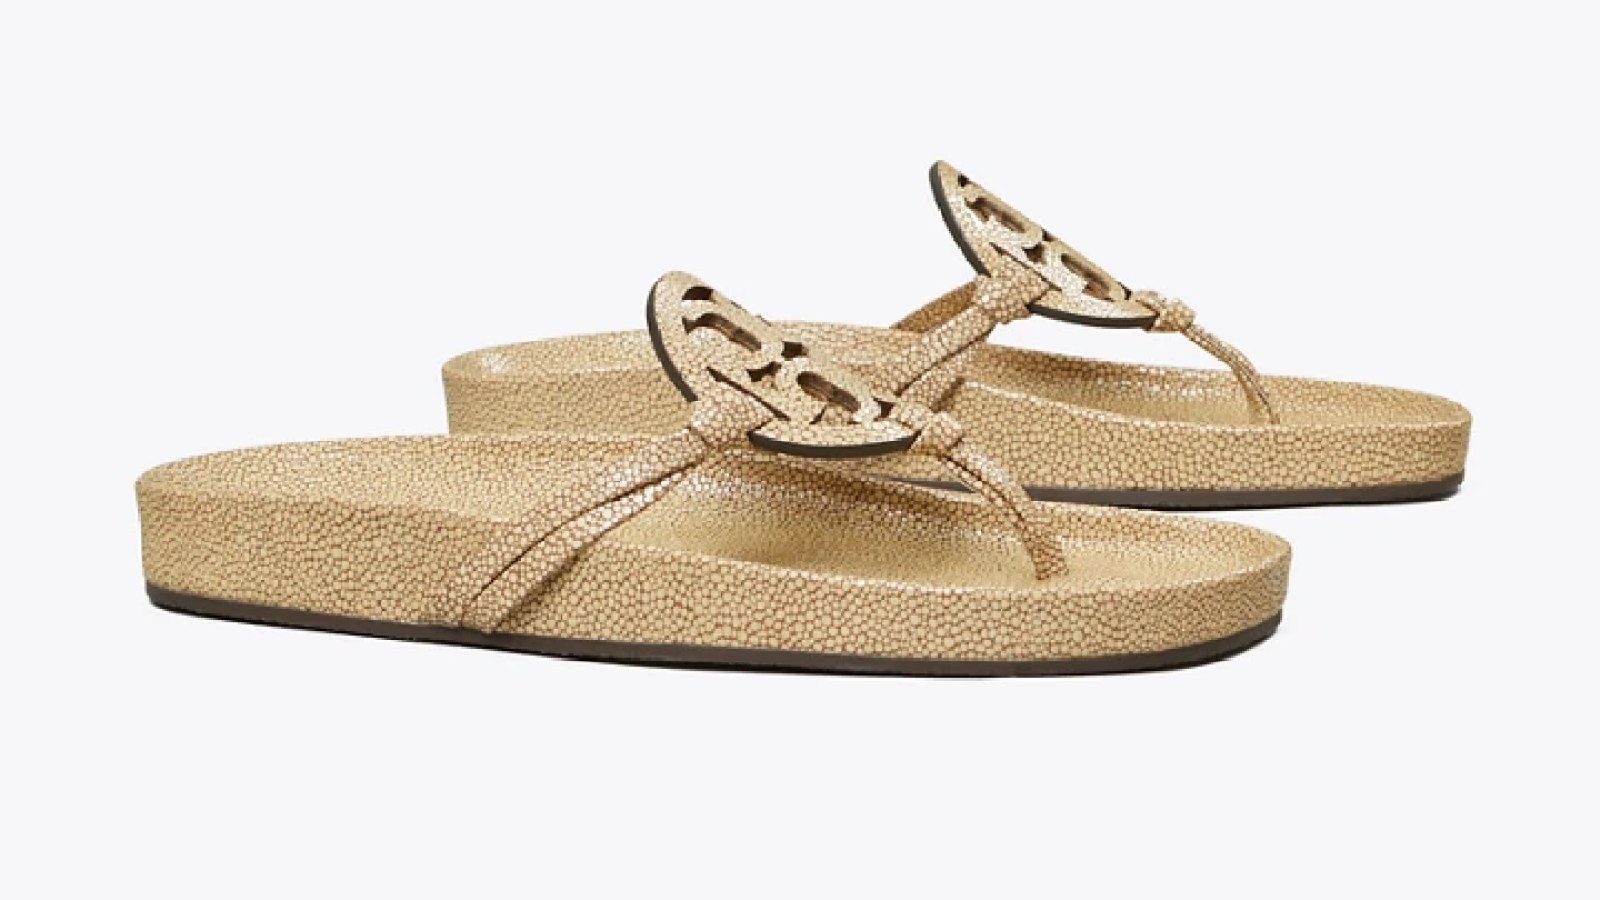 Shop the End-of-Summer Sandals Sale From Tory Burch